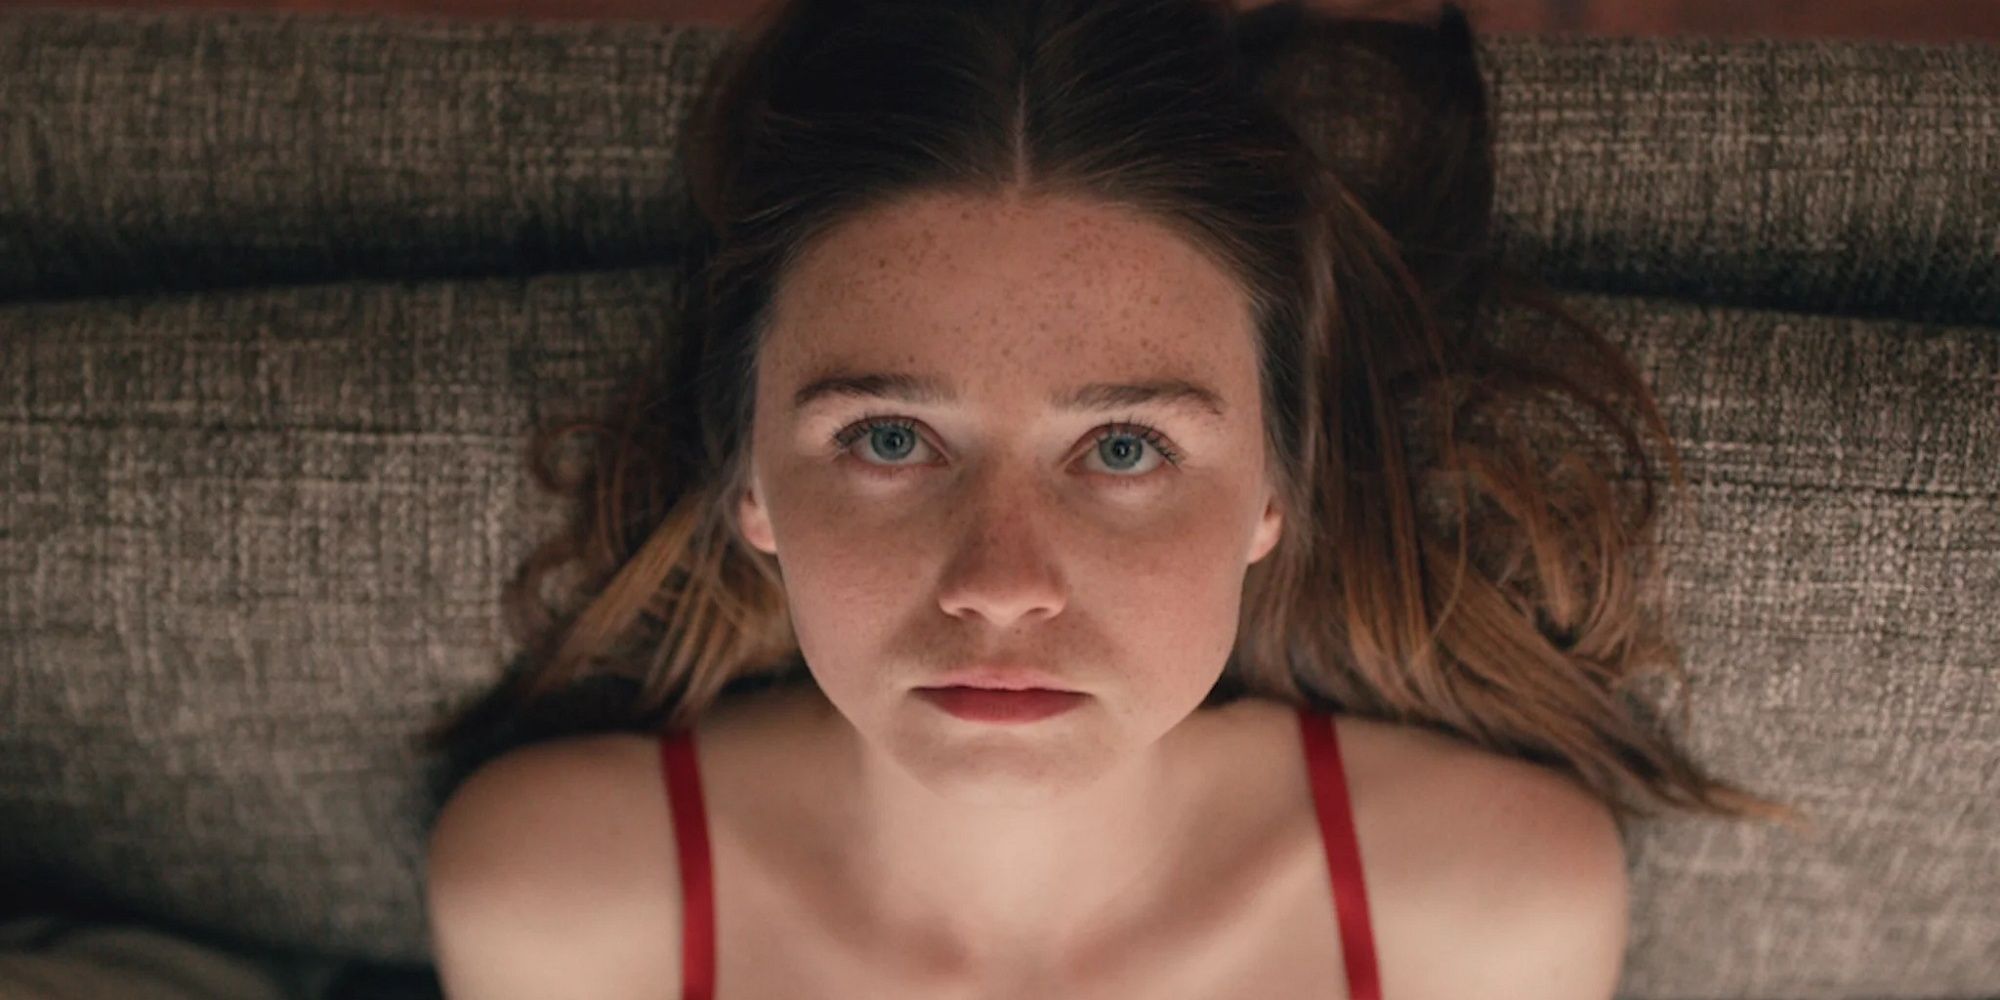 Alyssa laying down and looking up to the ceiling in 'The End of the F***ing World.'